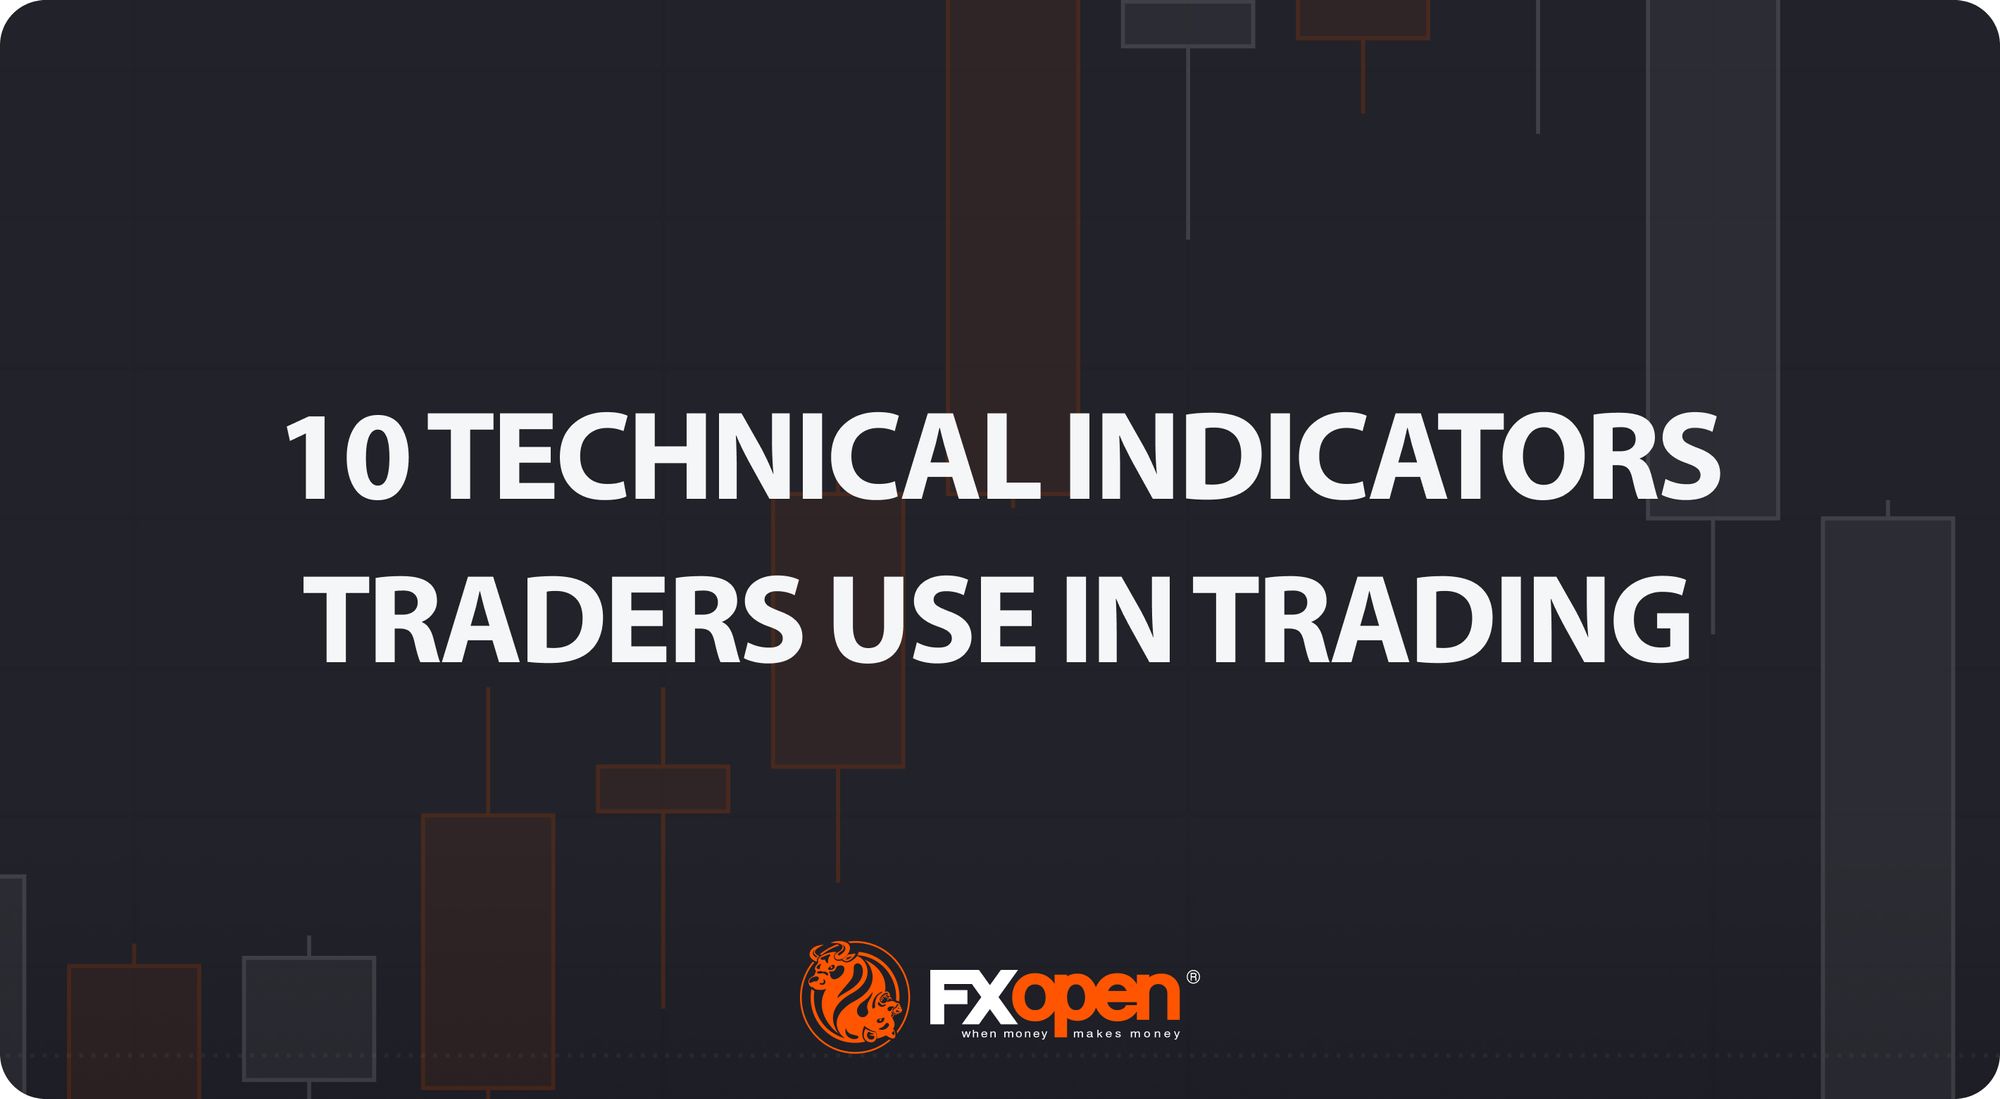 10 Technical Indicators Traders Use in Trading